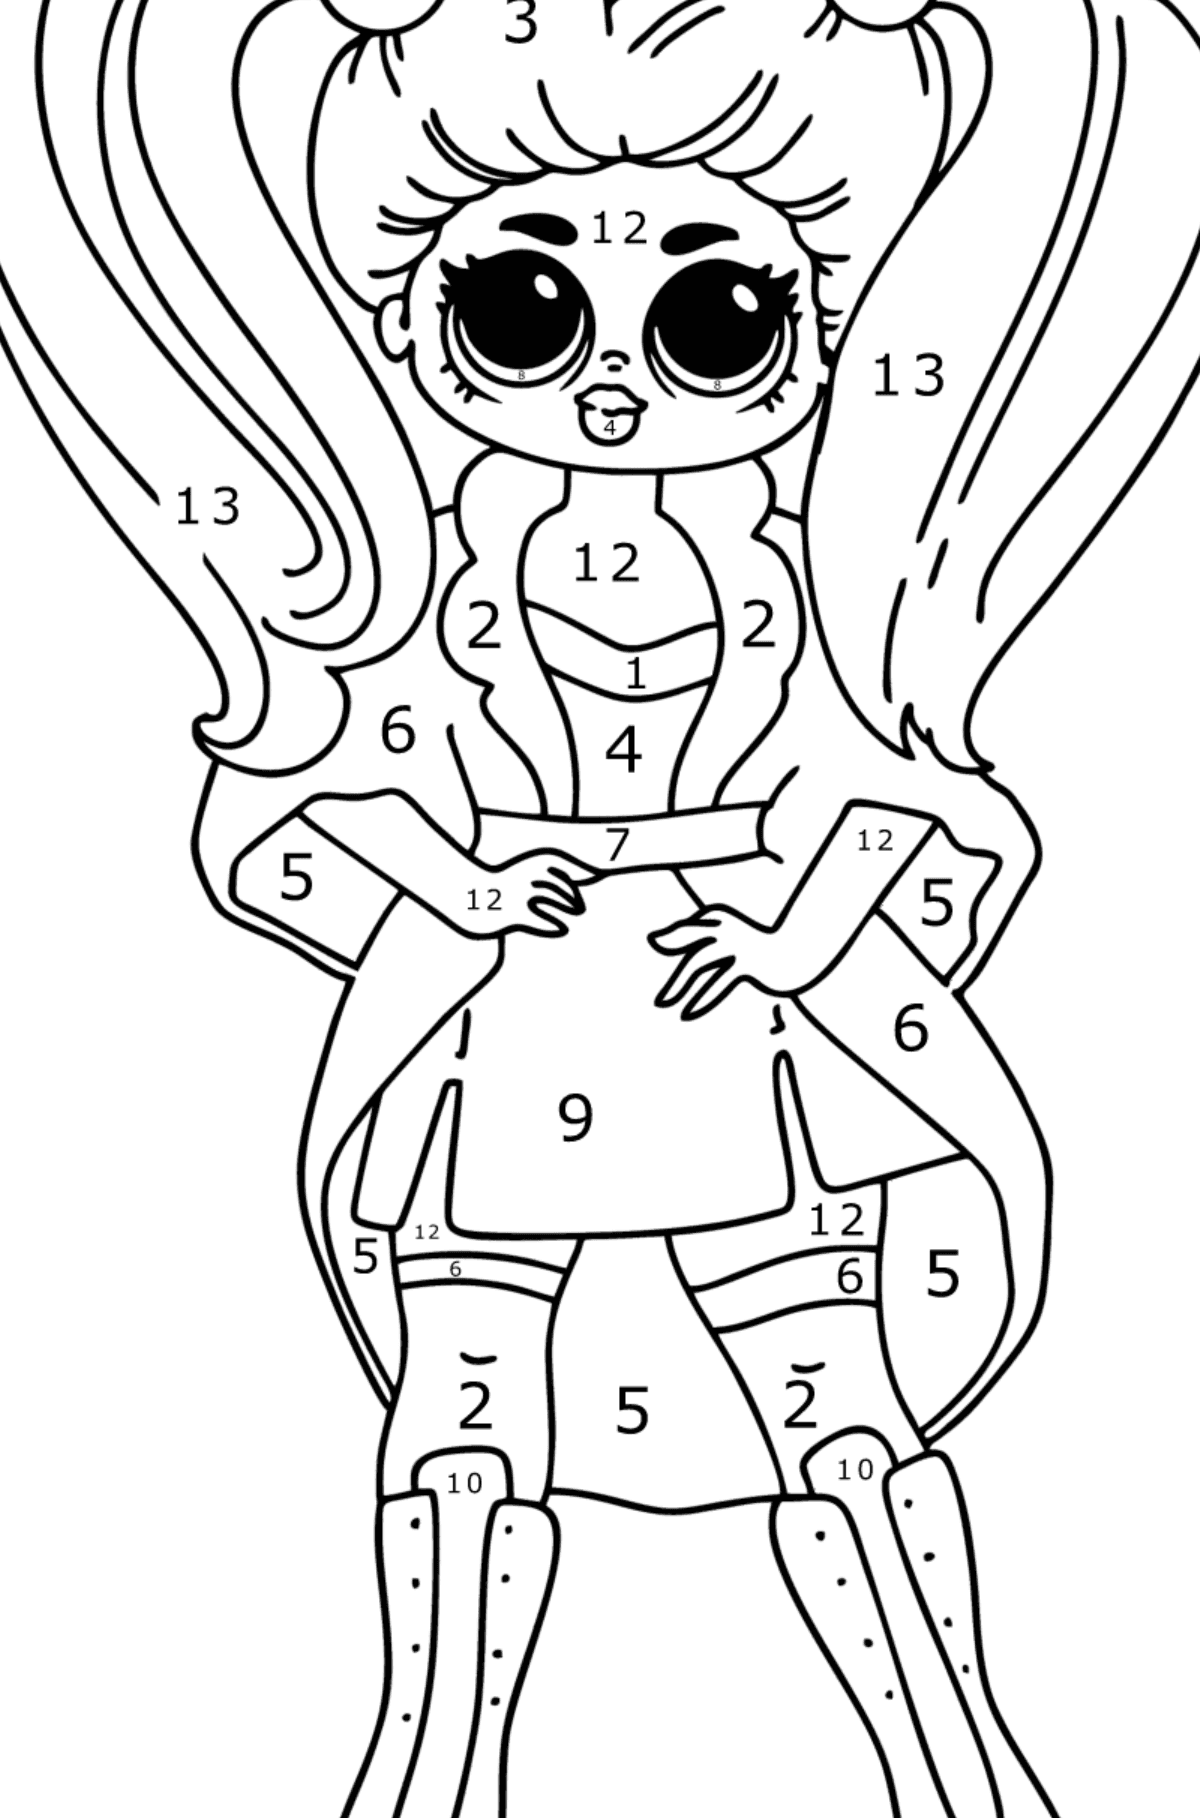 Coloring page LOL OMG Doll - Coloring by Numbers for Kids